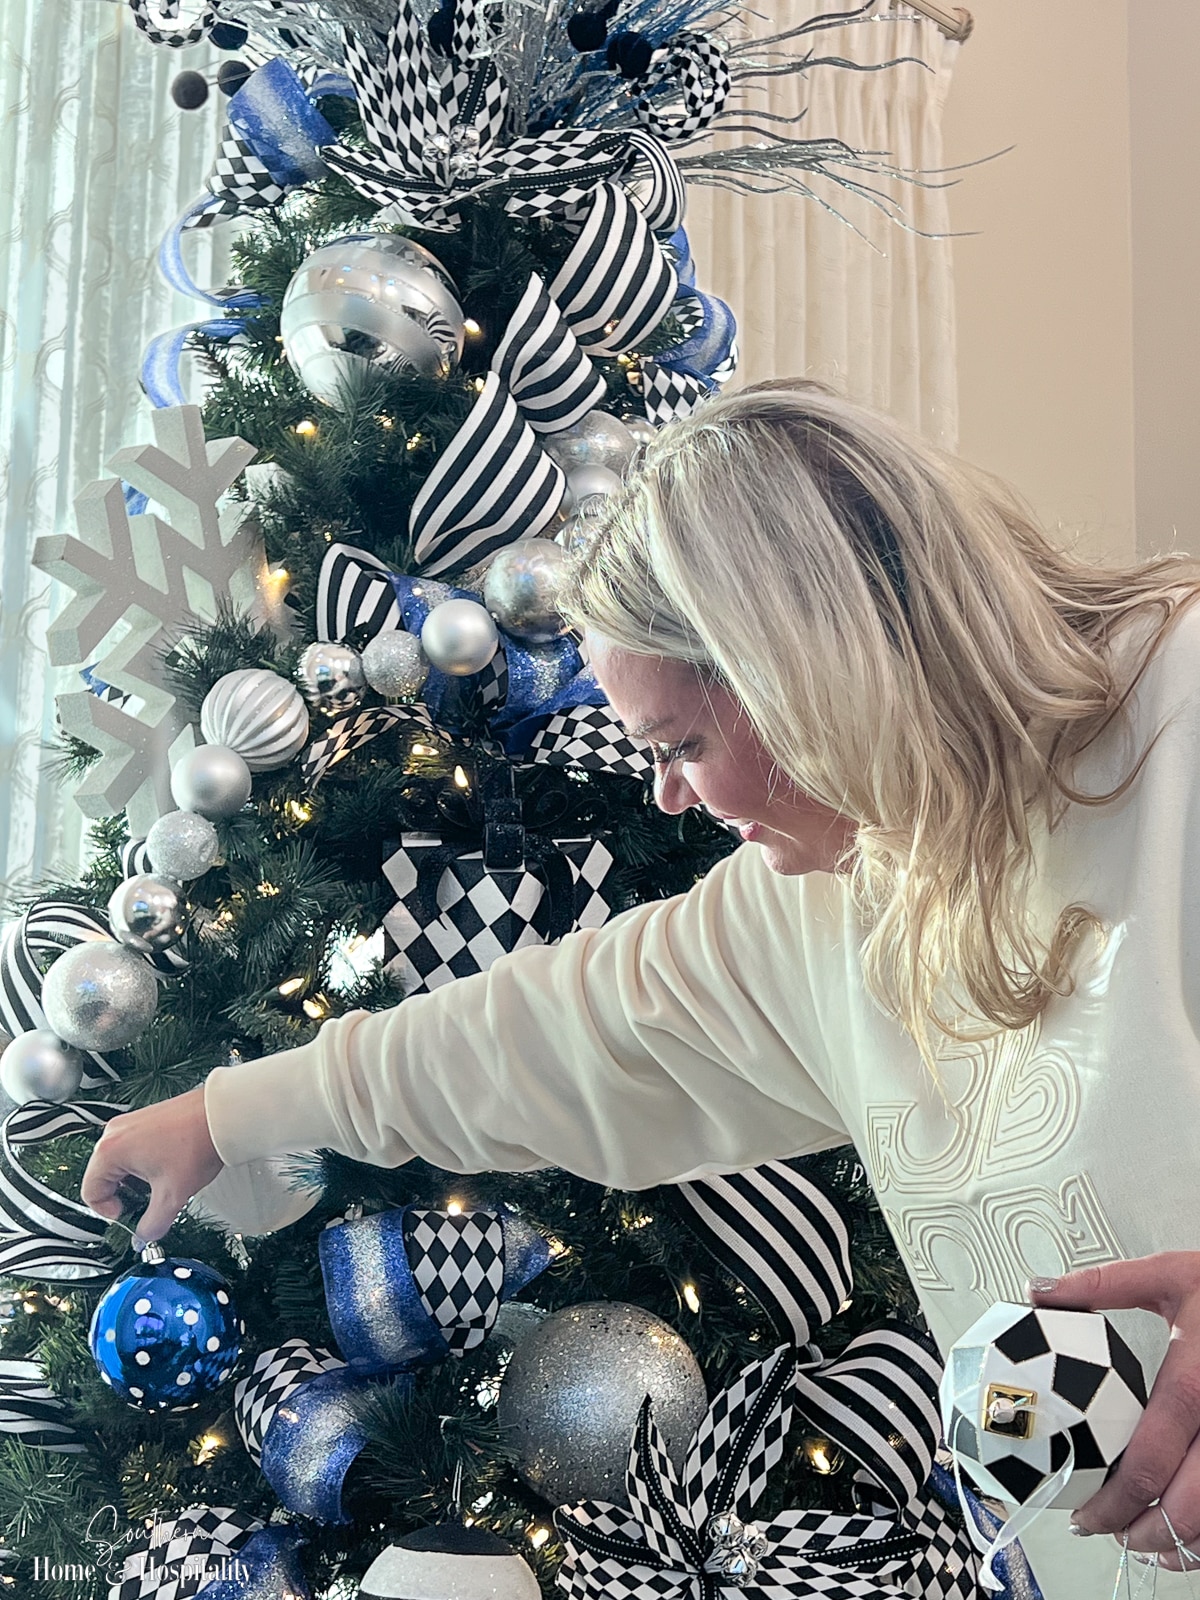 How to Decorate a Christmas Tree Like a Pro Step by Step!